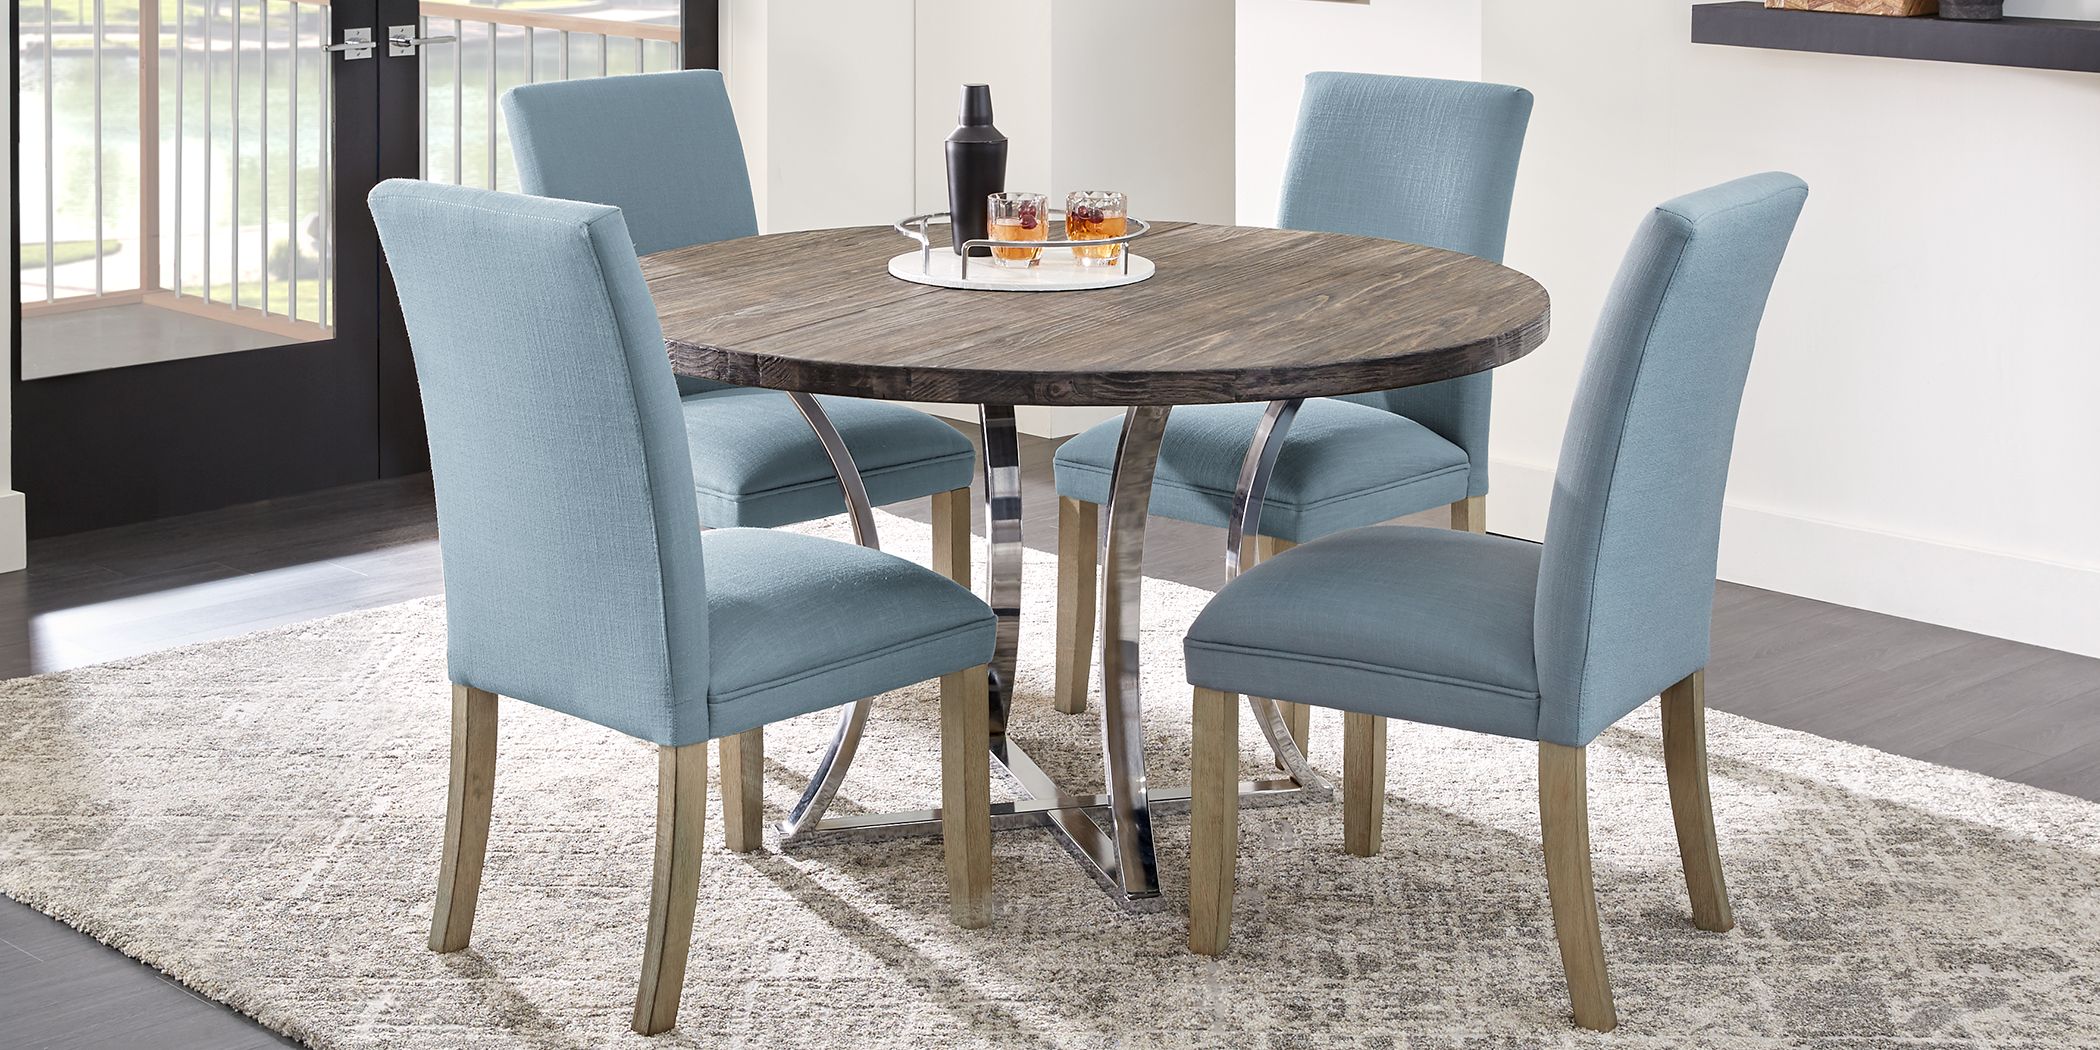 Arland Dark Brown 5 Pc Round Dining Room with Blue Chairs